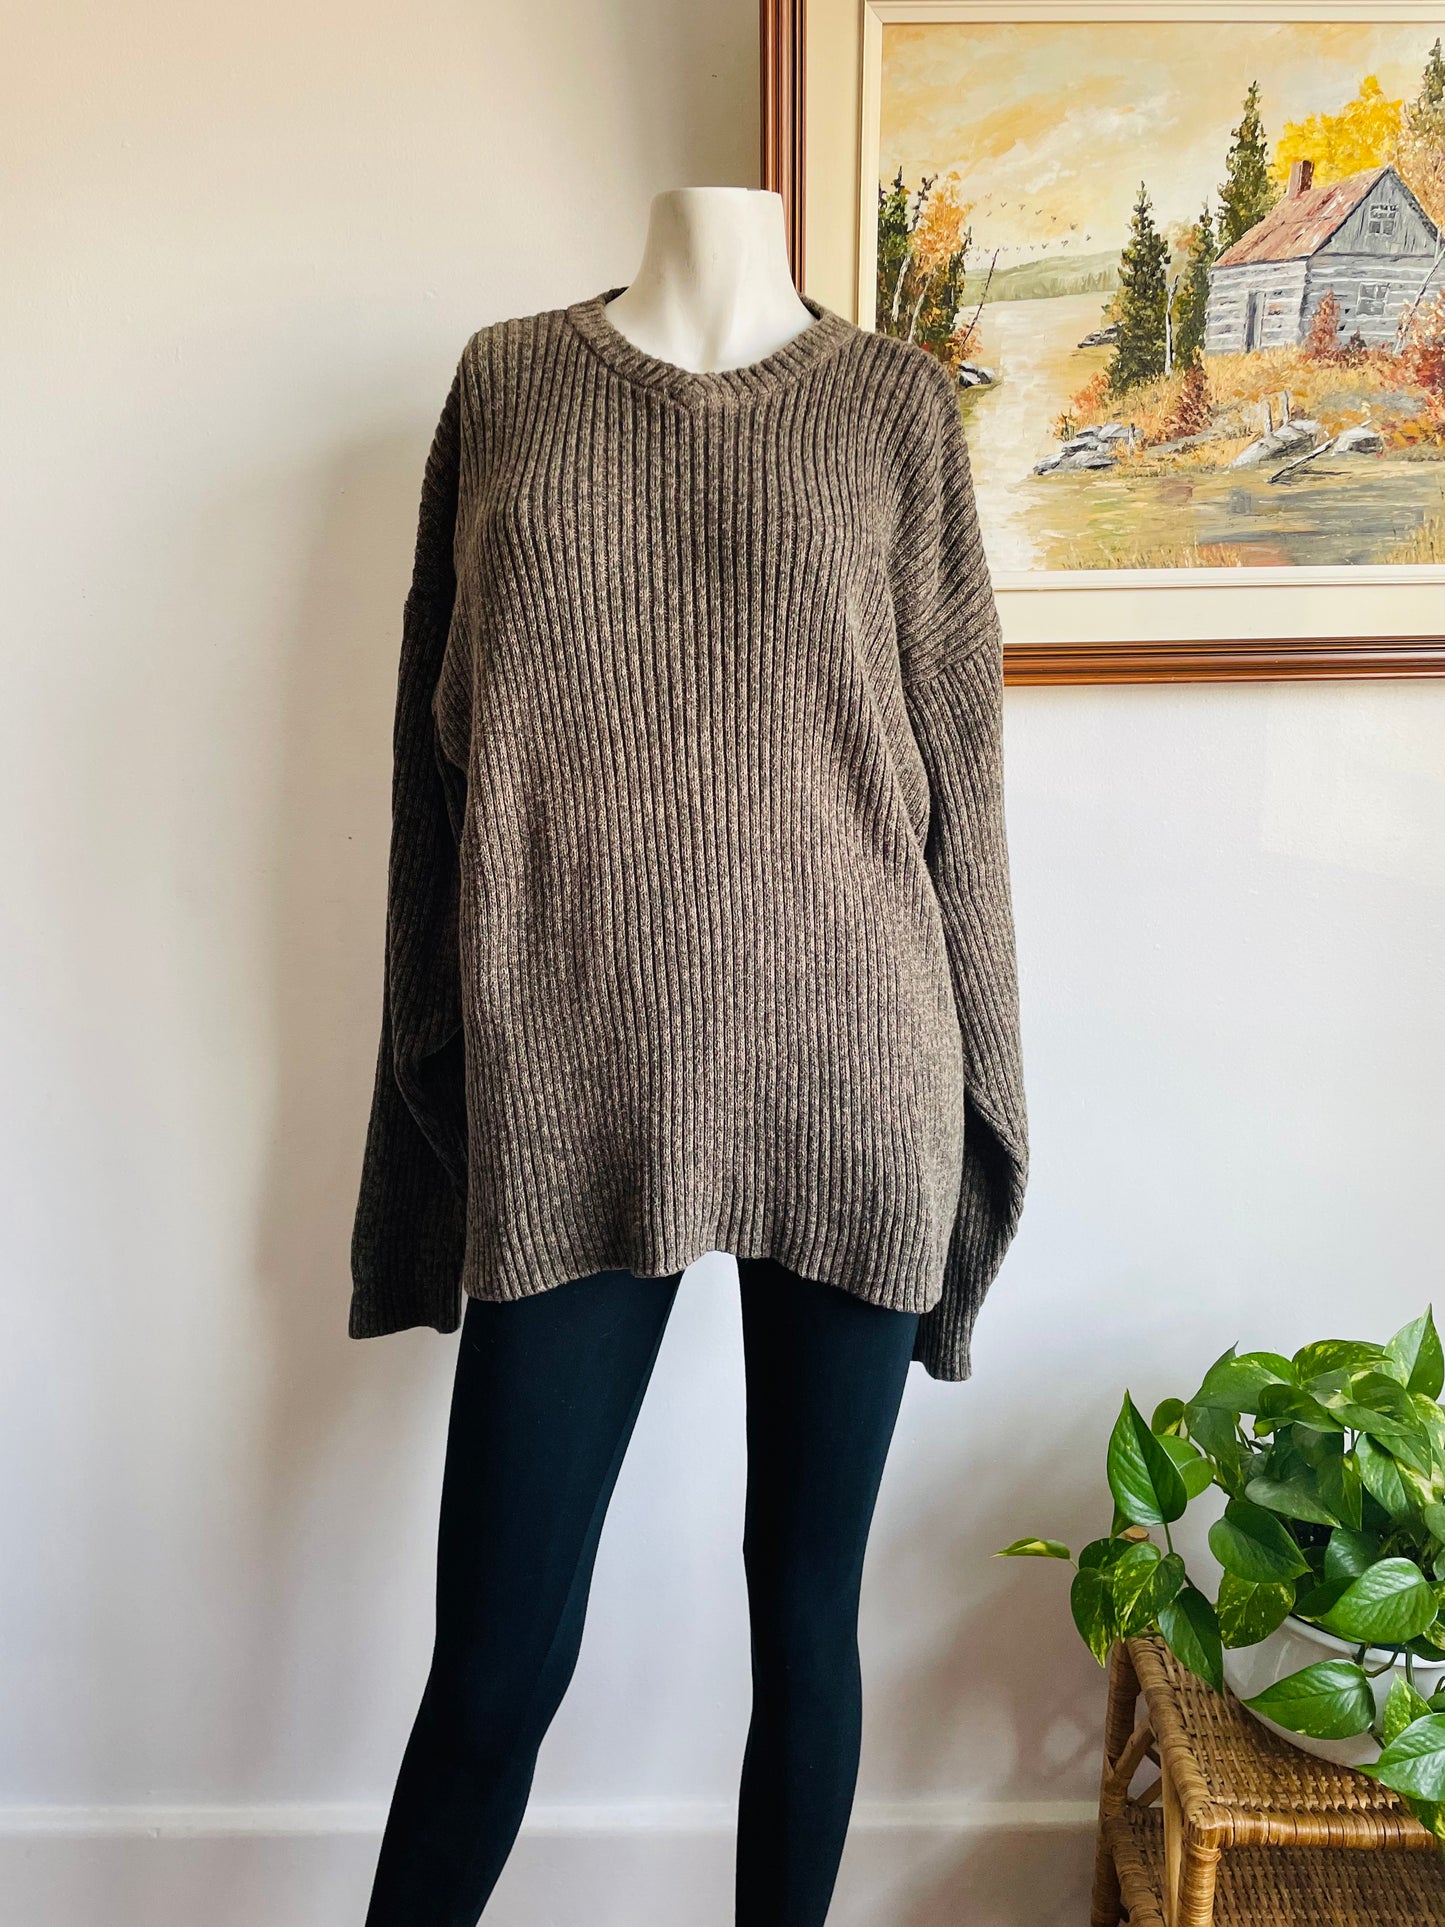 Northern Elements Flecked Green Ribbed Sweater - Made in Hong Kong